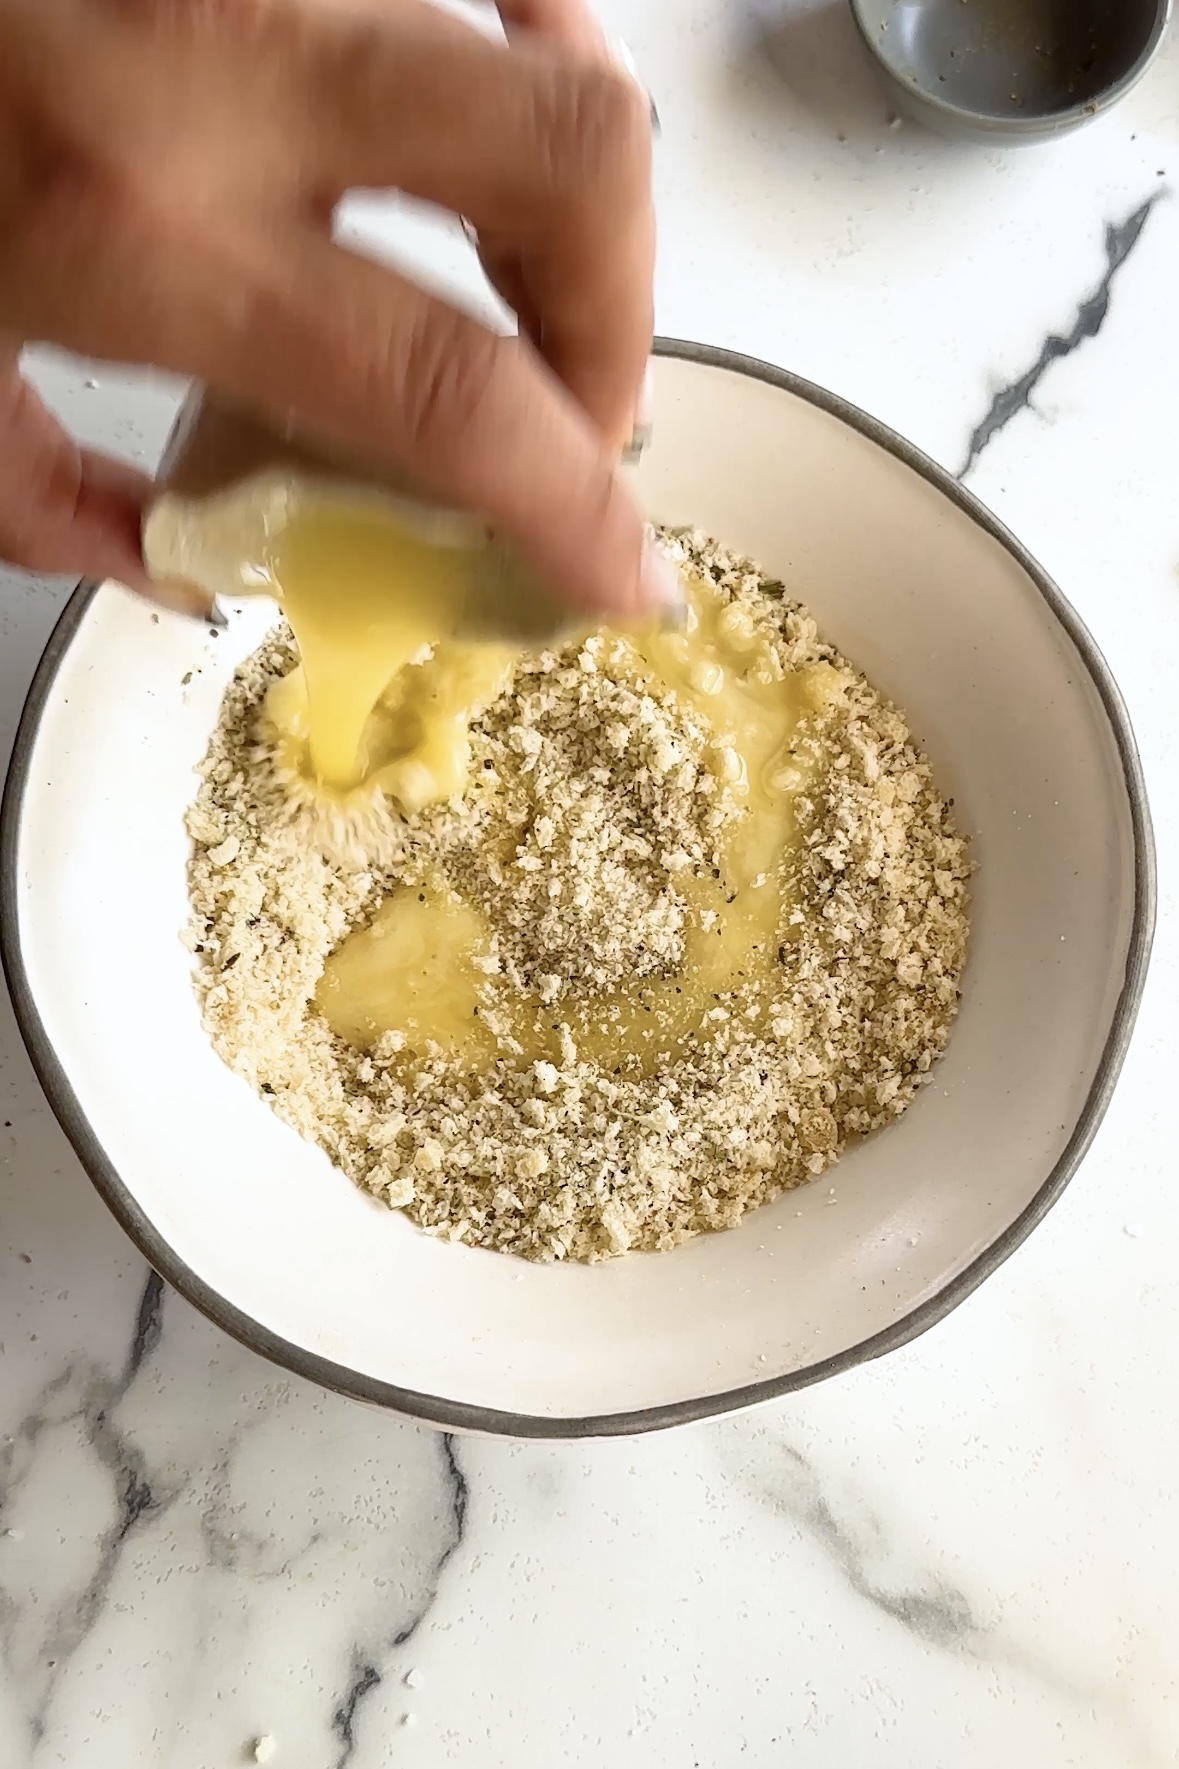 Melted butter is poured into a bowl of bread crumbs.